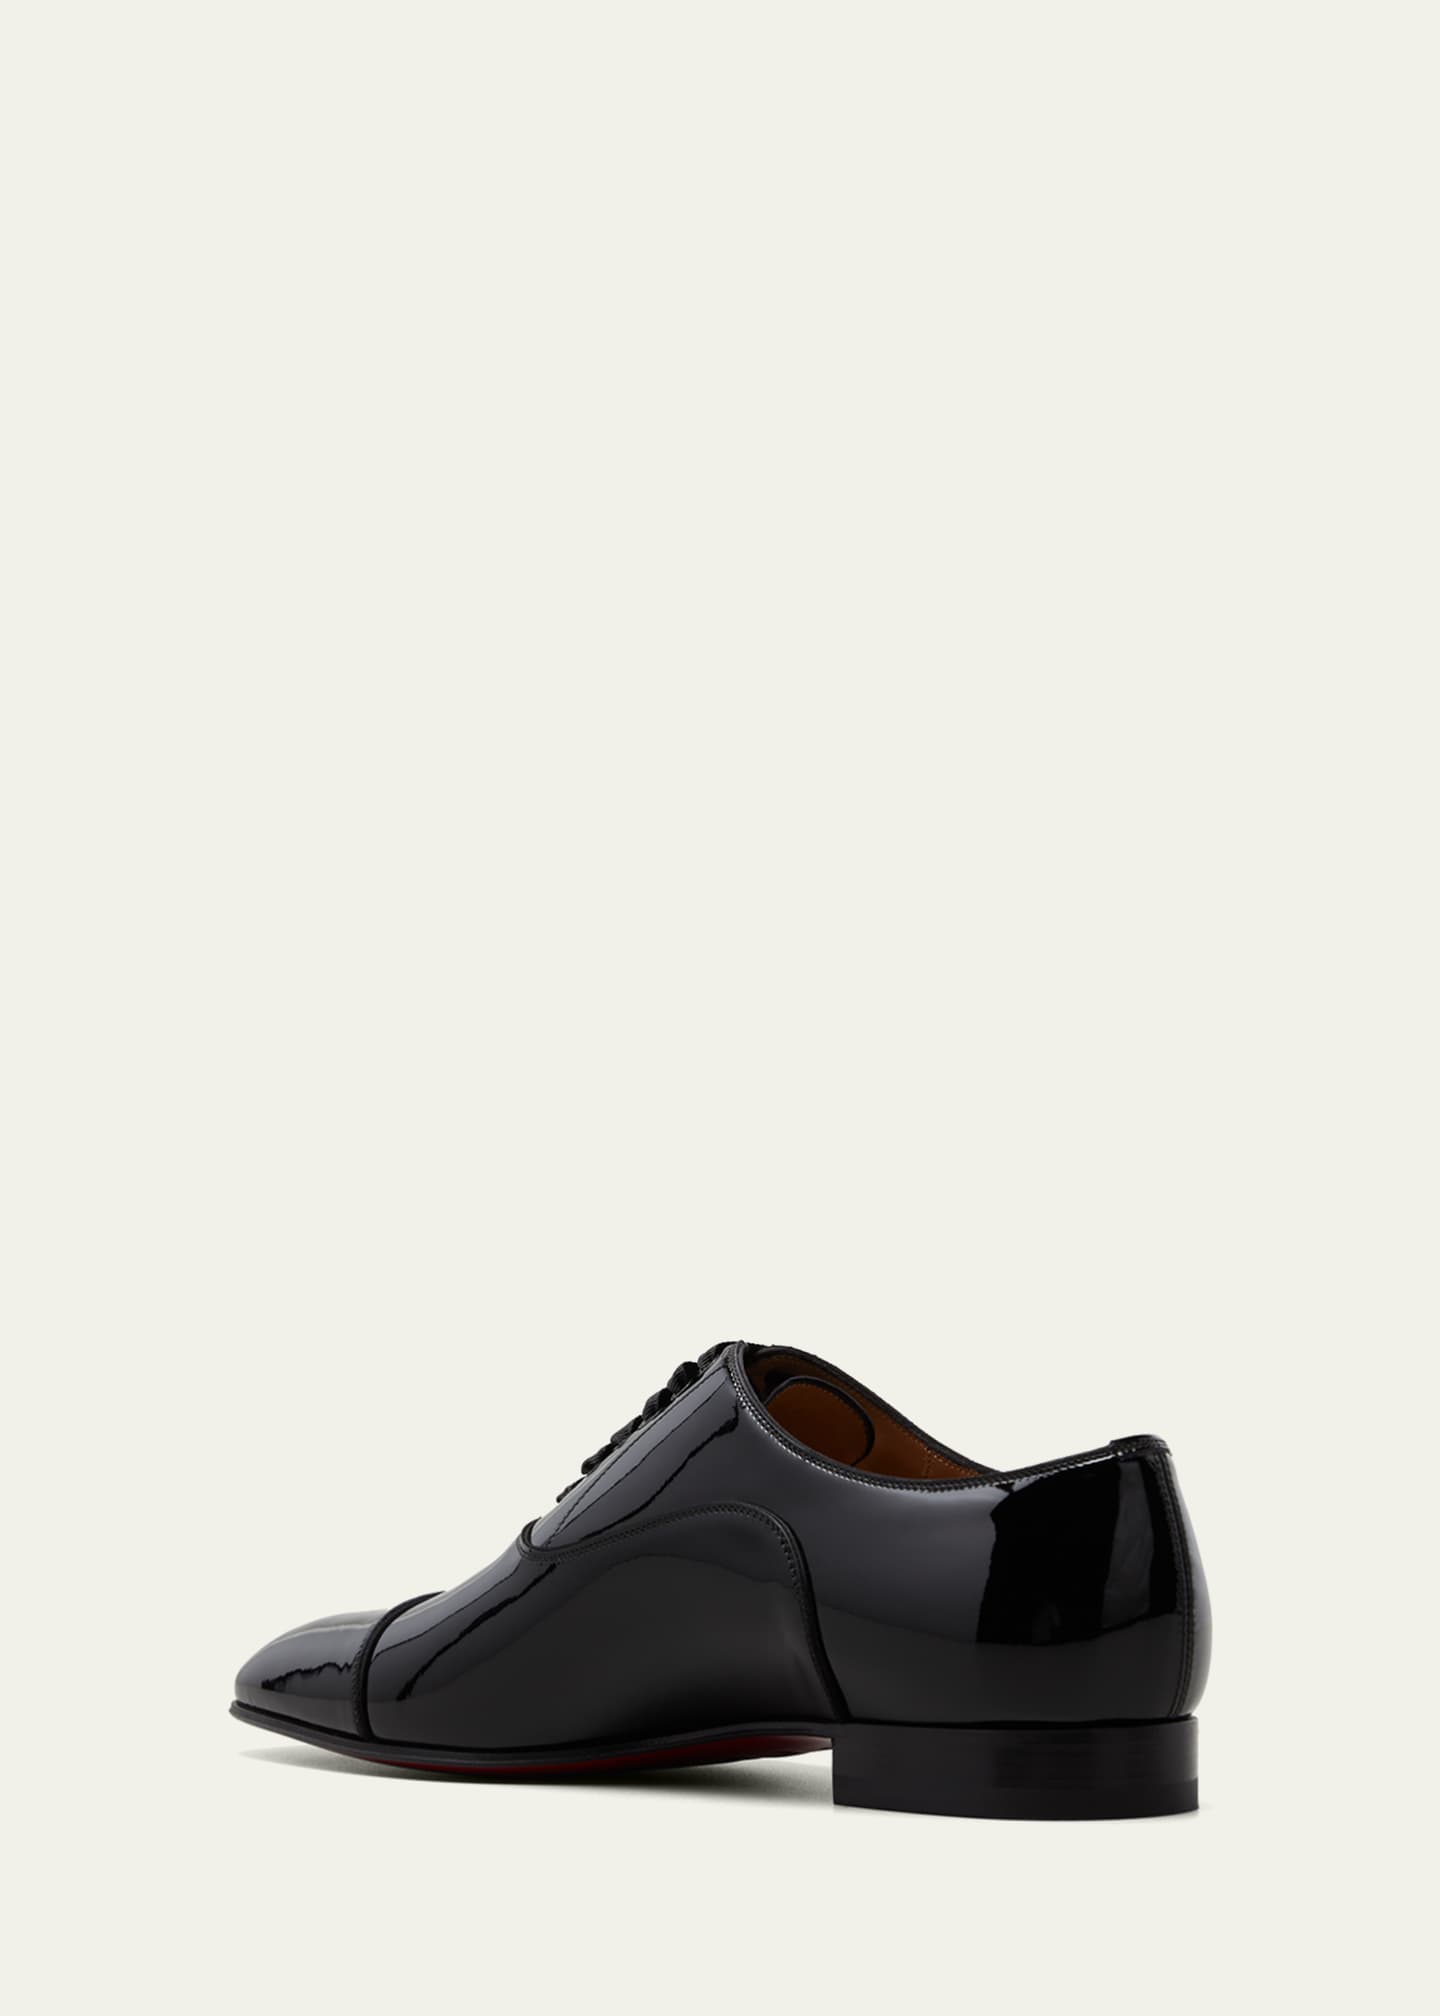 Greggo patent leather Oxford shoes in black - Christian Louboutin